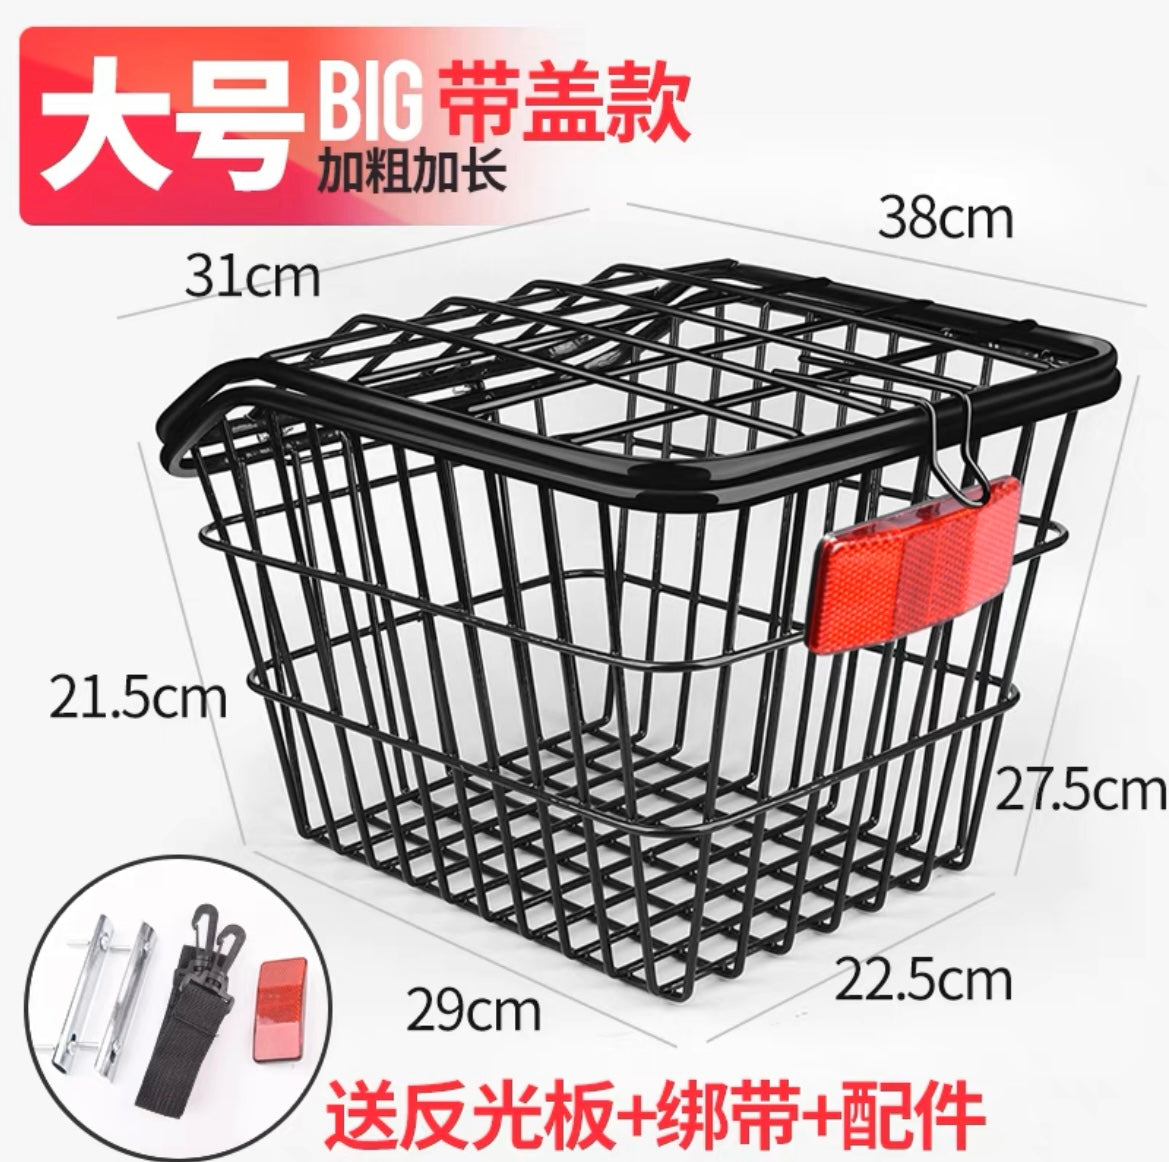 REAR BASKET WIRE MESH BLACK WITH COVER